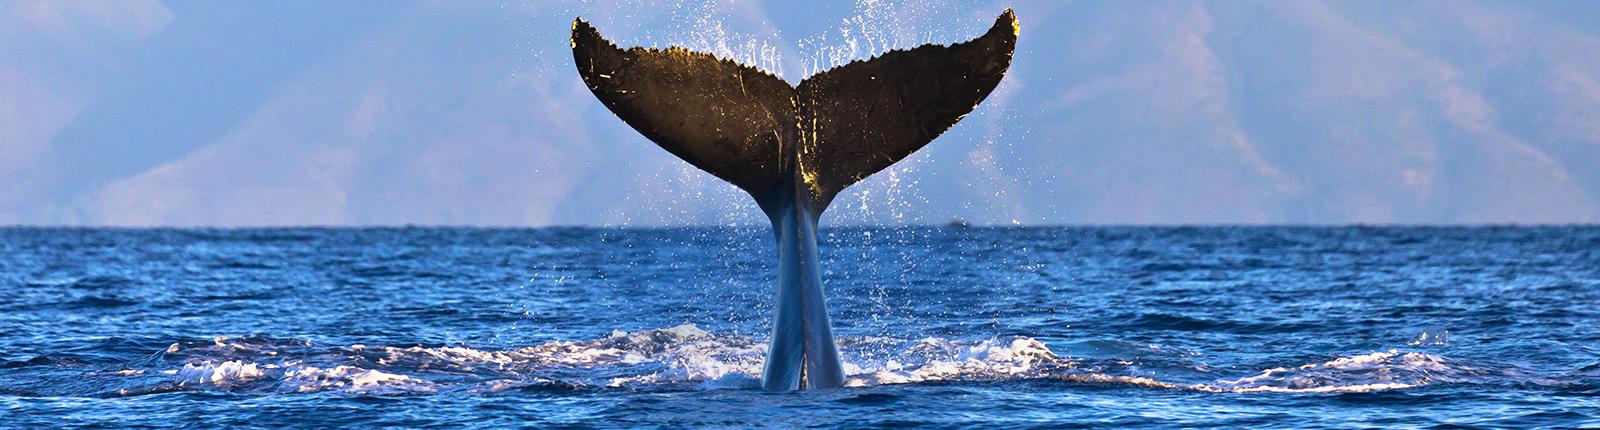 The tail of a humpback whale leaping out of the blue waters of Maui, Hawaii